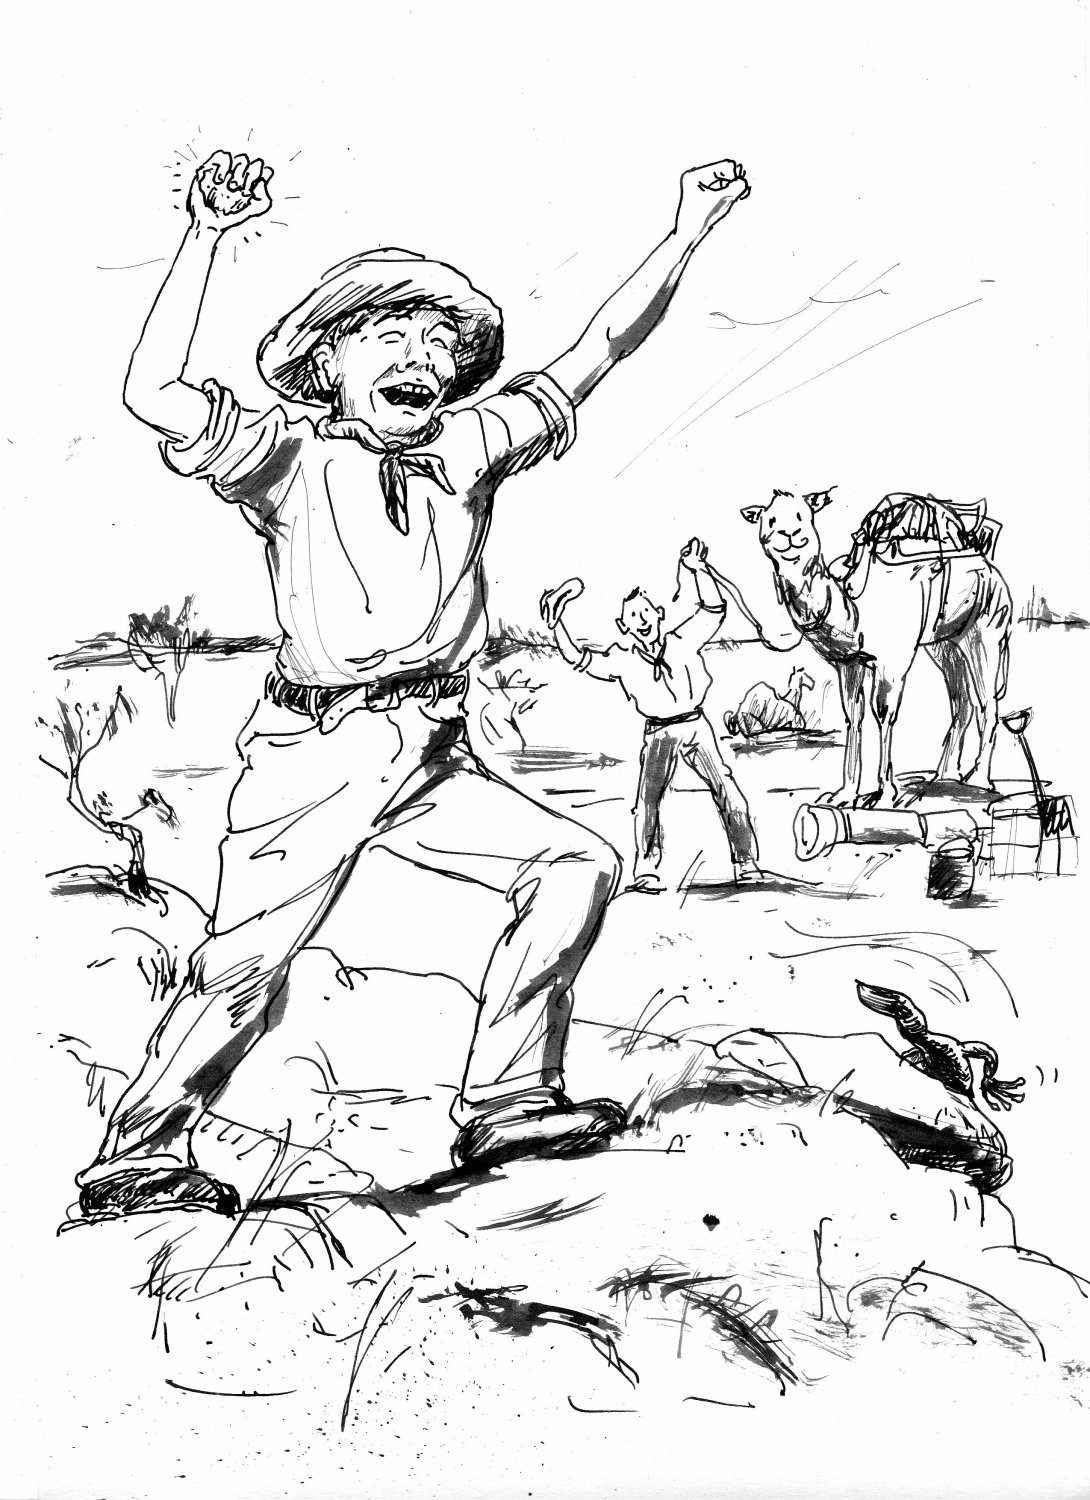 Sketch of boy in the desert holding up a piece of gold and cheering. Behind him a man holding the reins of a camel is equally excited by the treasure.